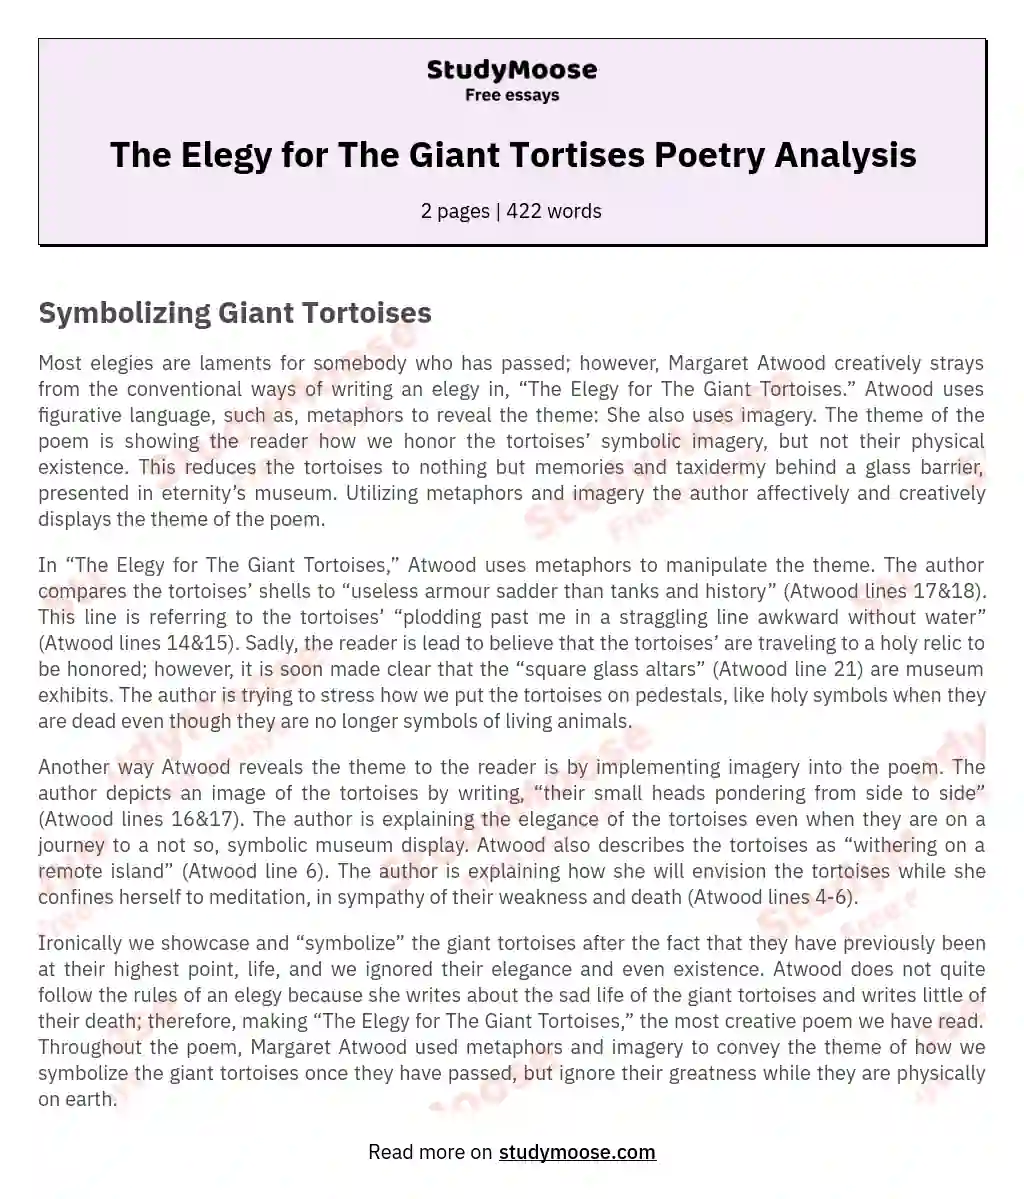 The Elegy for The Giant Tortises Poetry Analysis